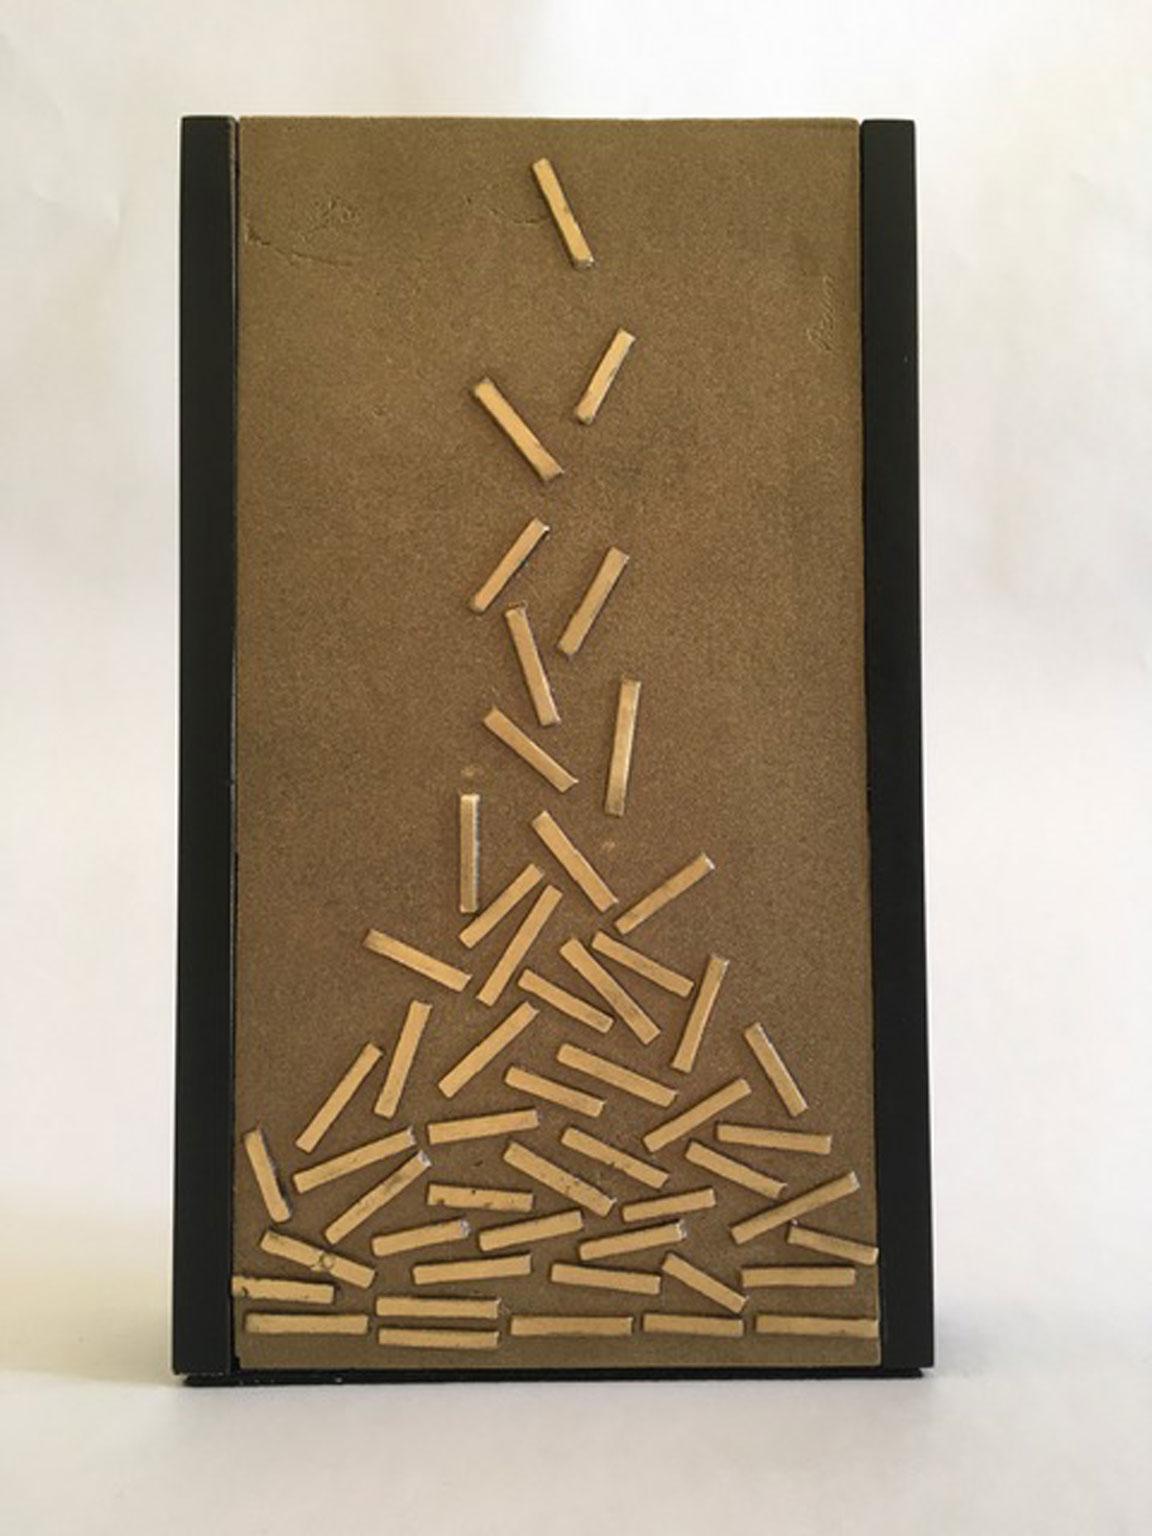 Italy 1990 Post-Modern Bronze Abstract Sculpture by Beppe Bonetti For Sale 4